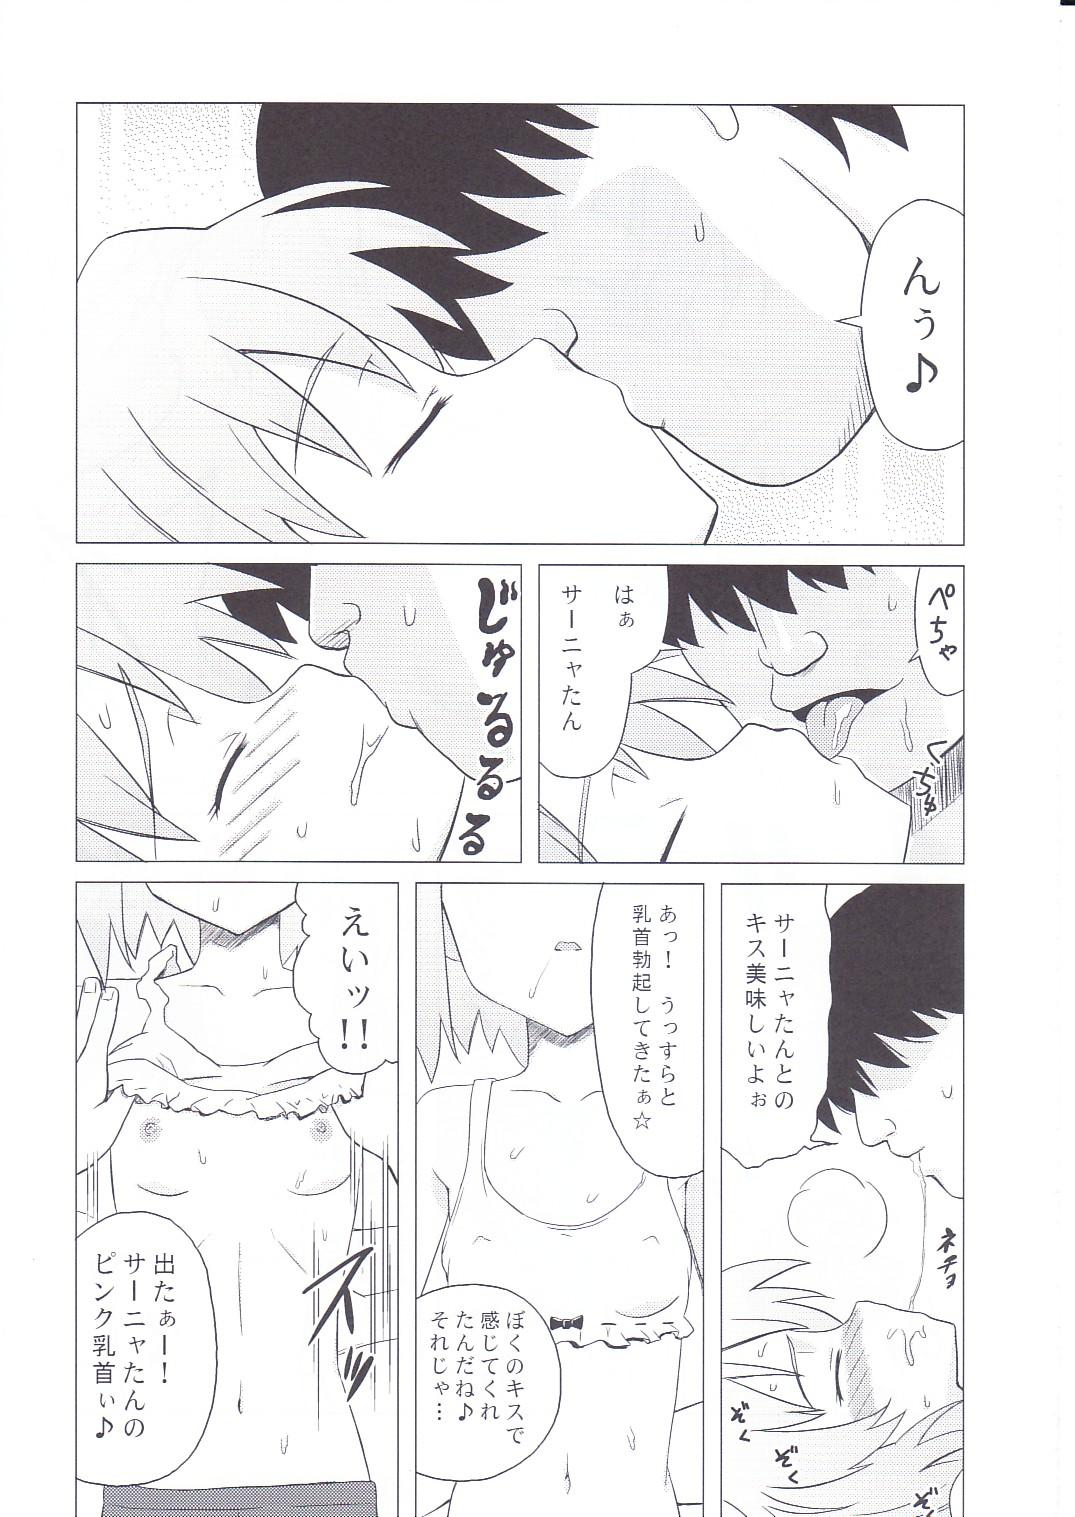 Money Talks Sleeping witches - Strike witches Anal Gape - Page 6